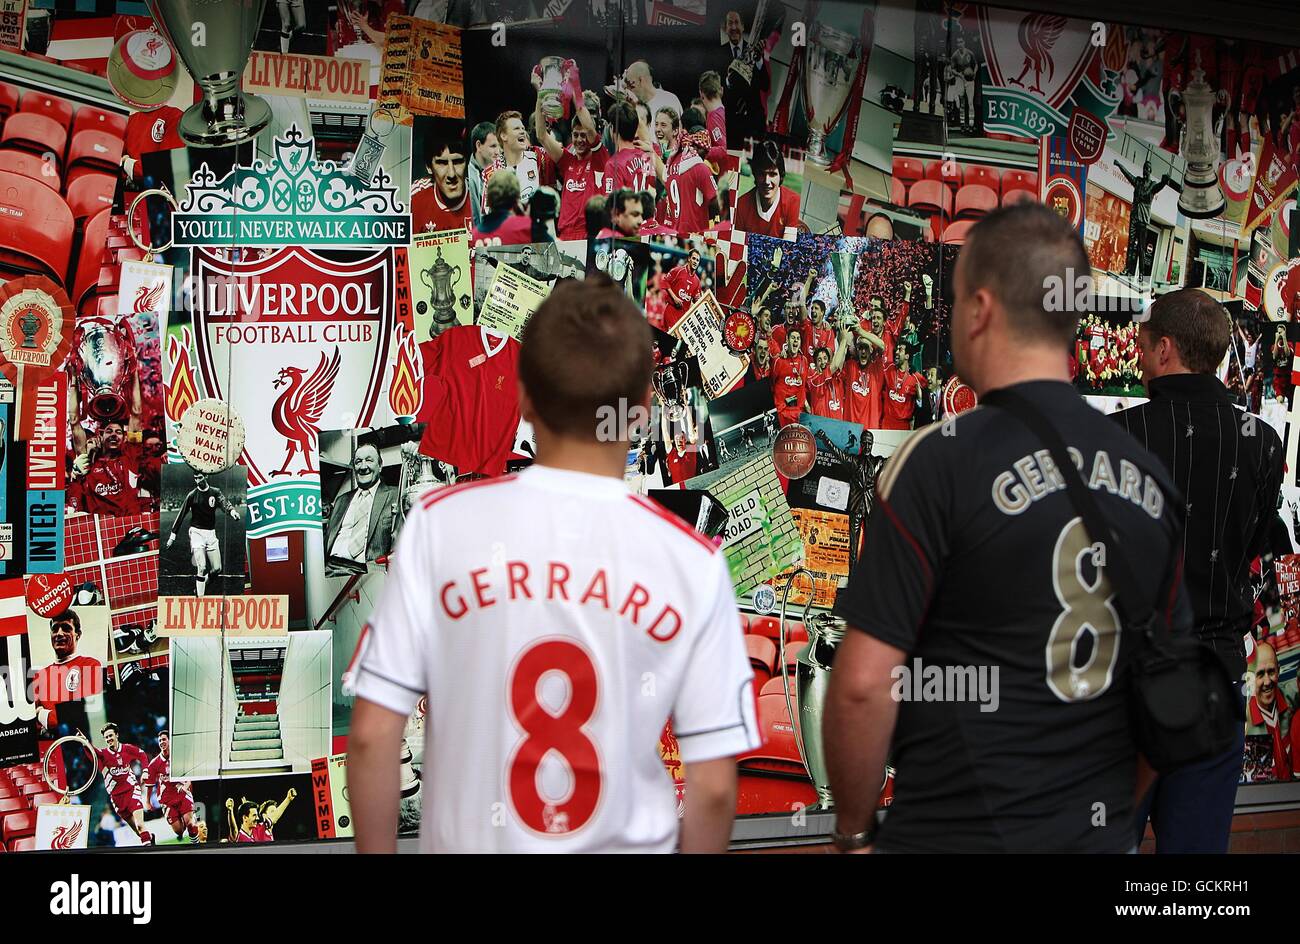 Two fans wearing Steven Gerrard replica shirts gaze at the shop front of the Liverpool FC Club Shop Stock Photo